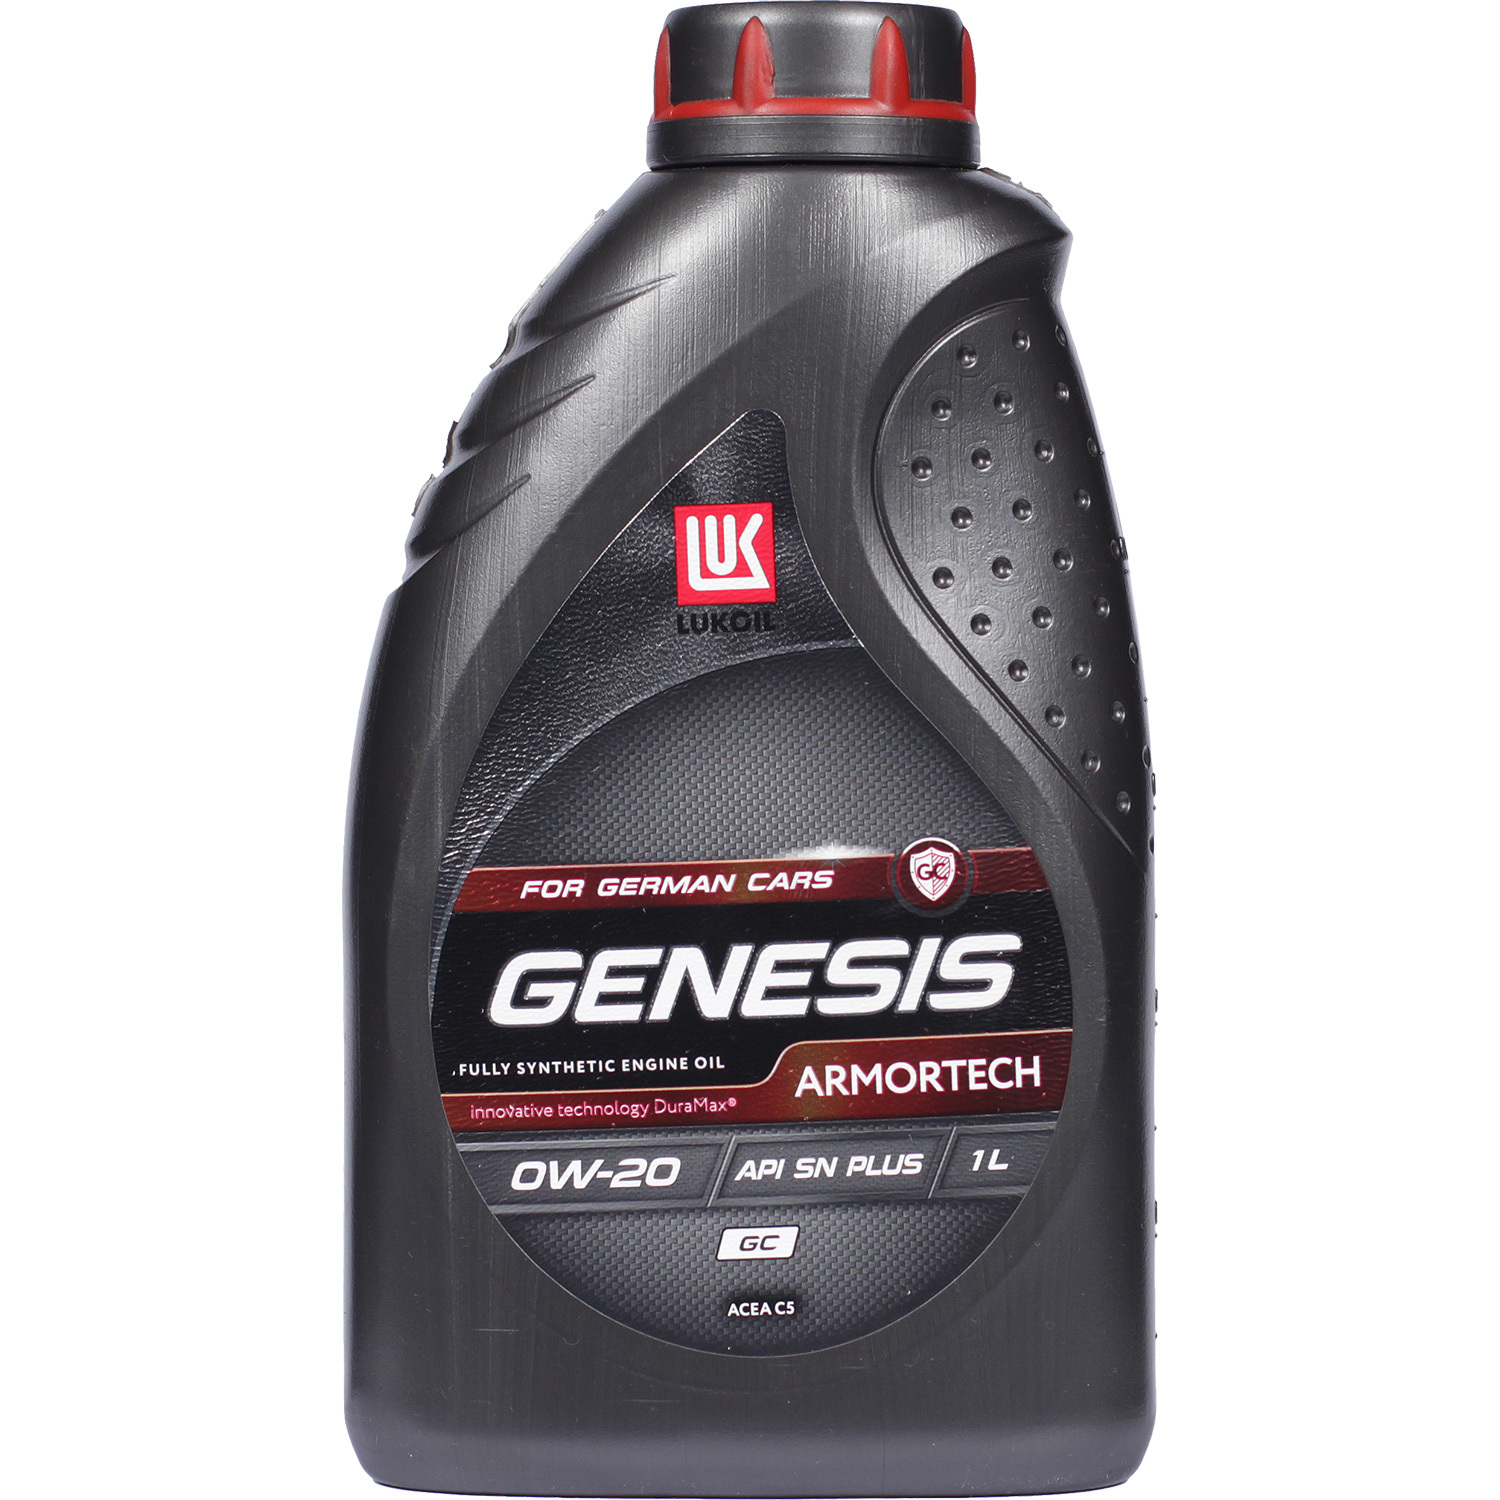 Lukoil Моторное масло Lukoil Genesis Armortech GC 0W-20, 1 л lukoil моторное масло lukoil genesis armortech jp 0w 30 4 л